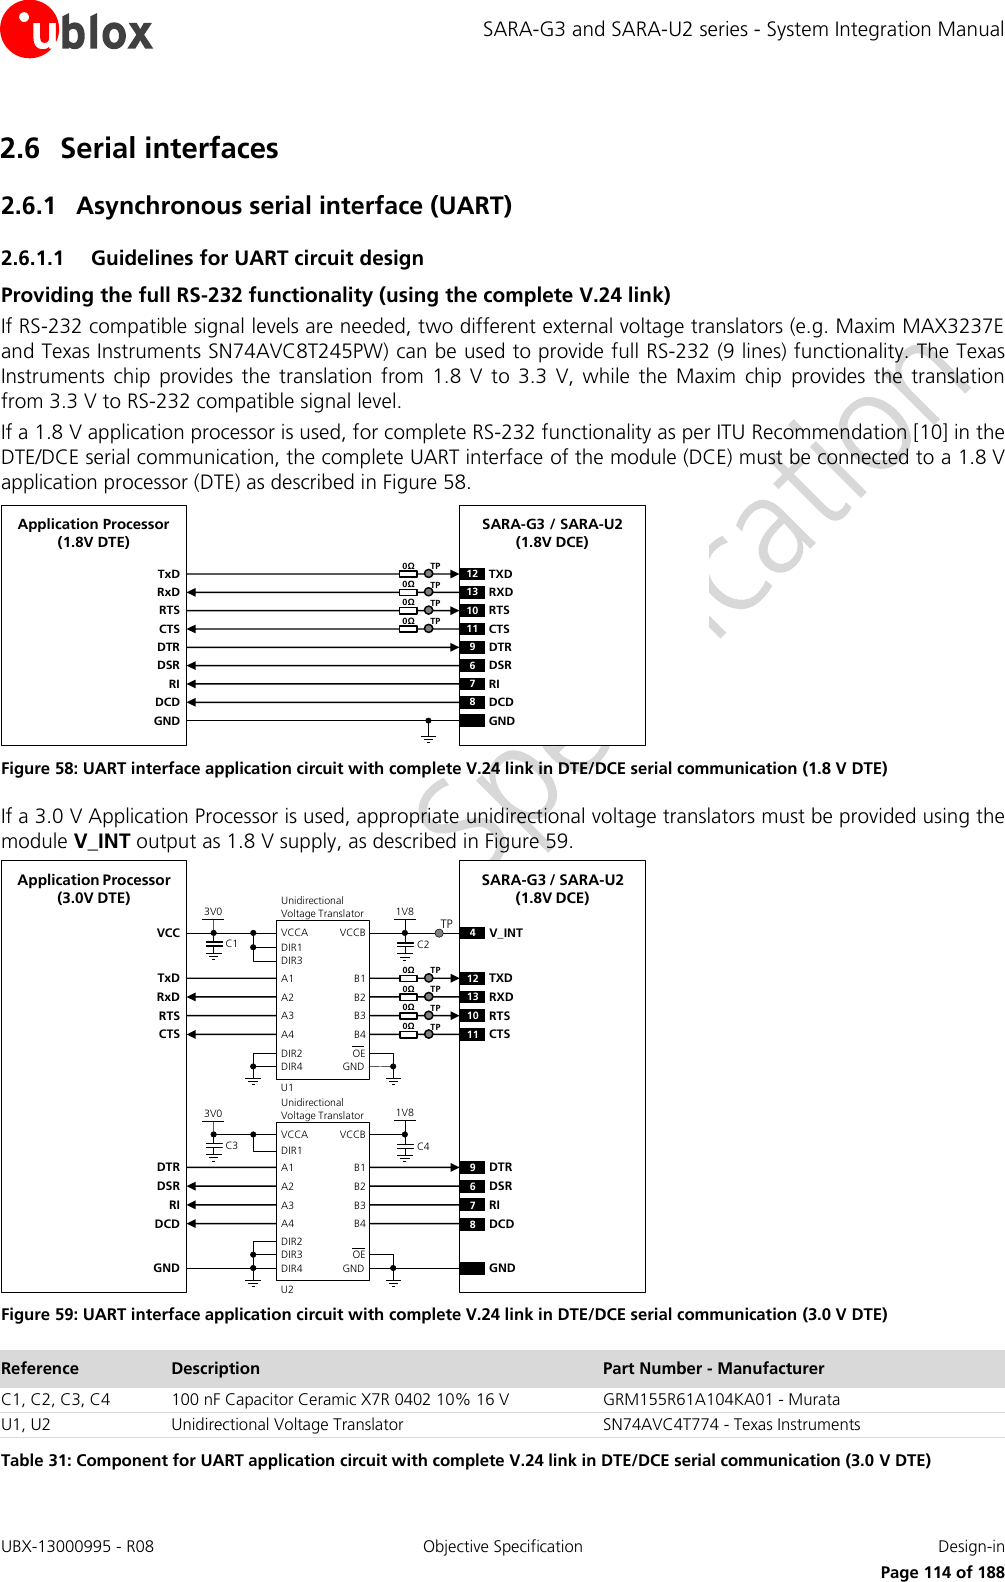 SARA-G3 and SARA-U2 series - System Integration Manual UBX-13000995 - R08  Objective Specification  Design-in     Page 114 of 188 2.6 Serial interfaces 2.6.1 Asynchronous serial interface (UART) 2.6.1.1 Guidelines for UART circuit design Providing the full RS-232 functionality (using the complete V.24 link) If RS-232 compatible signal levels are needed, two different external voltage translators (e.g. Maxim MAX3237E and Texas Instruments SN74AVC8T245PW) can be used to provide full RS-232 (9 lines) functionality. The Texas Instruments  chip  provides  the  translation  from  1.8  V  to  3.3  V,  while  the  Maxim  chip  provides  the  translation from 3.3 V to RS-232 compatible signal level. If a 1.8 V application processor is used, for complete RS-232 functionality as per ITU Recommendation [10] in the DTE/DCE serial communication, the complete UART interface of the module (DCE) must be connected to a 1.8 V application processor (DTE) as described in Figure 58. TxDApplication Processor(1.8V DTE)RxDRTSCTSDTRDSRRIDCDGNDSARA-G3 / SARA-U2(1.8V DCE)12 TXD9DTR13 RXD10 RTS11 CTS6DSR7RI8DCDGND0ΩTP0ΩTP0ΩTP0ΩTP Figure 58: UART interface application circuit with complete V.24 link in DTE/DCE serial communication (1.8 V DTE) If a 3.0 V Application Processor is used, appropriate unidirectional voltage translators must be provided using the module V_INT output as 1.8 V supply, as described in Figure 59. 4V_INTTxDApplication Processor(3.0V DTE)RxDRTSCTSDTRDSRRIDCDGNDSARA-G3 / SARA-U2(1.8V DCE)12 TXD9DTR13 RXD10 RTS11 CTS6DSR7RI8DCDGND1V8B1 A1GNDU1B3A3VCCBVCCAUnidirectionalVoltage TranslatorC1 C23V0DIR3DIR2 OEDIR1VCCB2 A2B4A4DIR41V8B1 A1GNDU2B3A3VCCBVCCAUnidirectionalVoltage TranslatorC3 C43V0DIR1DIR3 OEB2 A2B4A4DIR4DIR2TP0ΩTP0ΩTP0ΩTP0ΩTP Figure 59: UART interface application circuit with complete V.24 link in DTE/DCE serial communication (3.0 V DTE) Reference Description Part Number - Manufacturer C1, C2, C3, C4 100 nF Capacitor Ceramic X7R 0402 10% 16 V GRM155R61A104KA01 - Murata U1, U2 Unidirectional Voltage Translator SN74AVC4T774 - Texas Instruments Table 31: Component for UART application circuit with complete V.24 link in DTE/DCE serial communication (3.0 V DTE) 